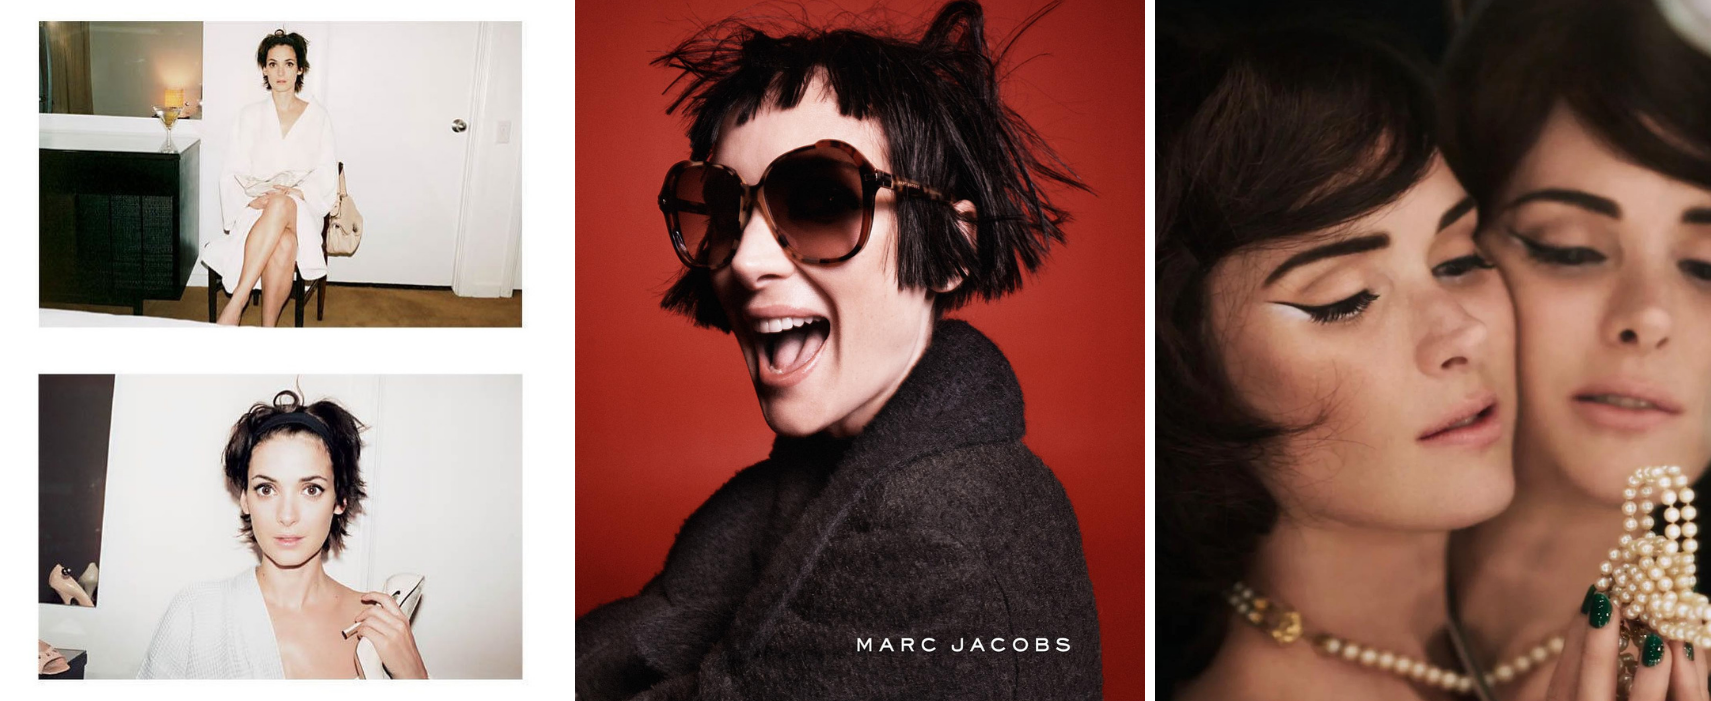 Winona Ryder is the 90s muse of our dreams in this new Marc Jacobs campaign